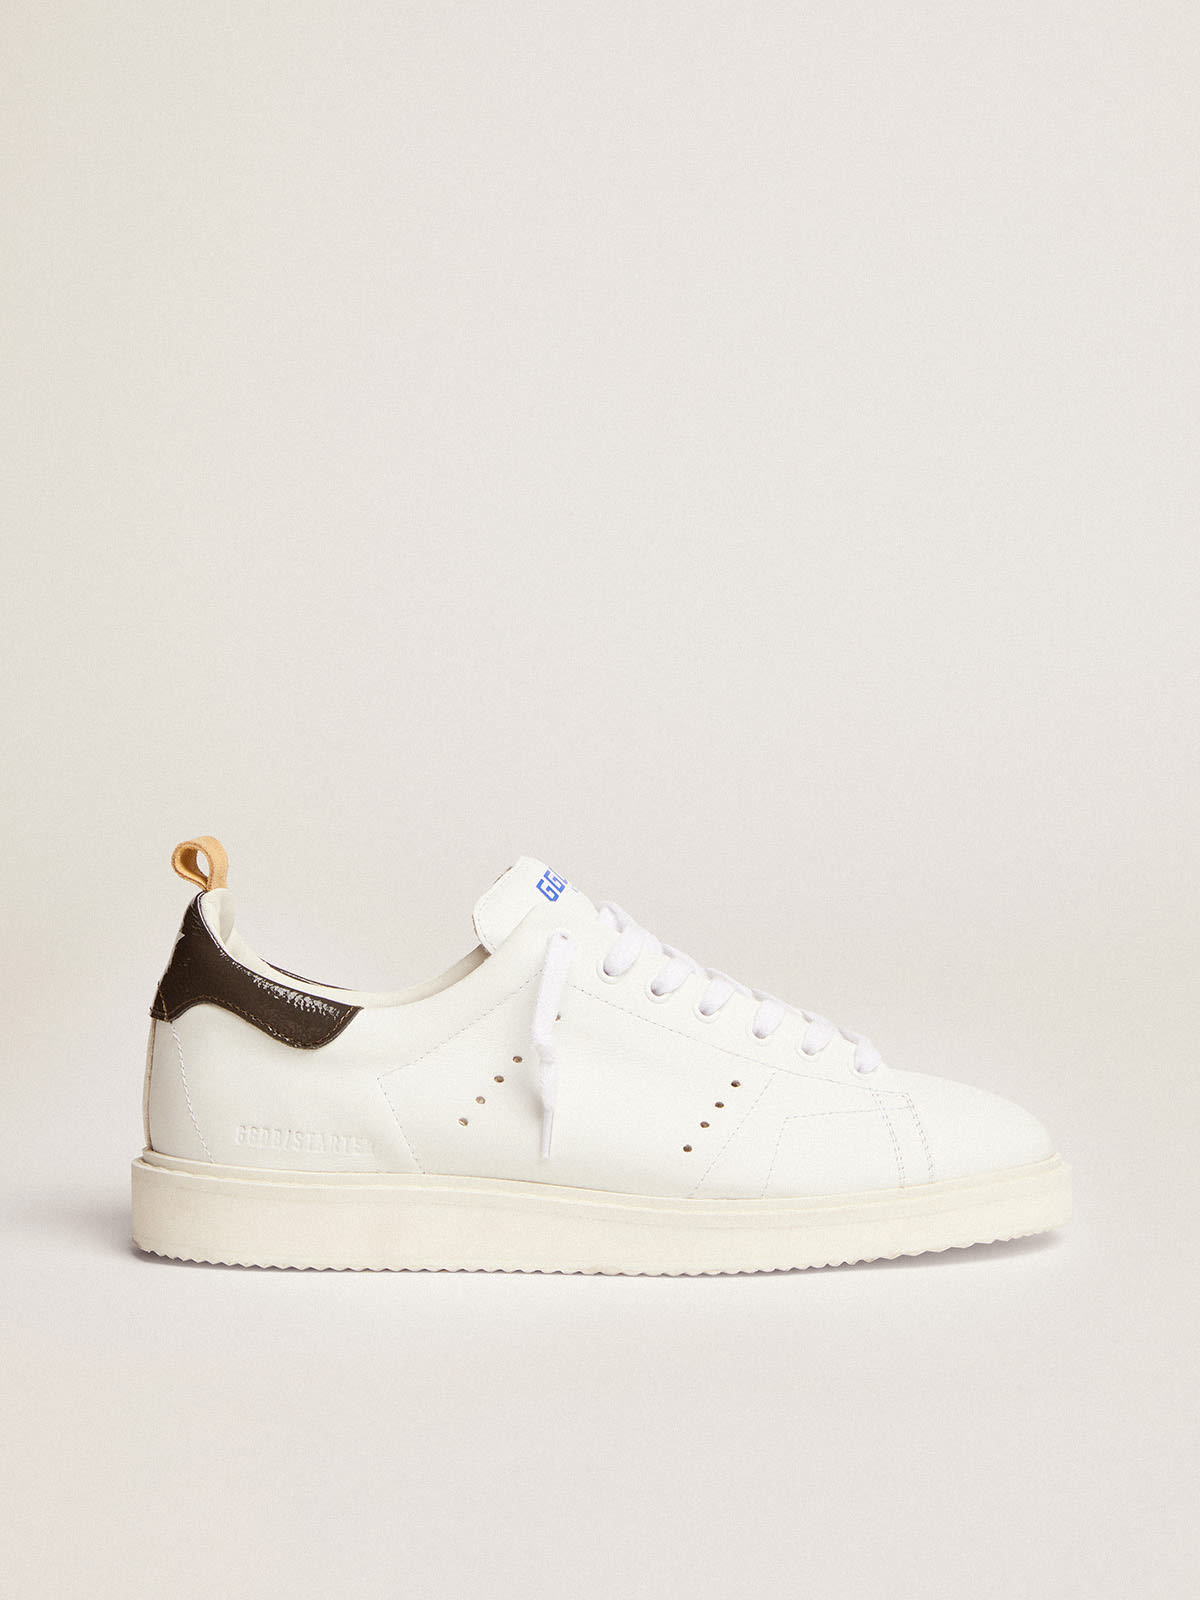 Golden Goose - Men's Starter in white naplack with painted leather heel tab in 